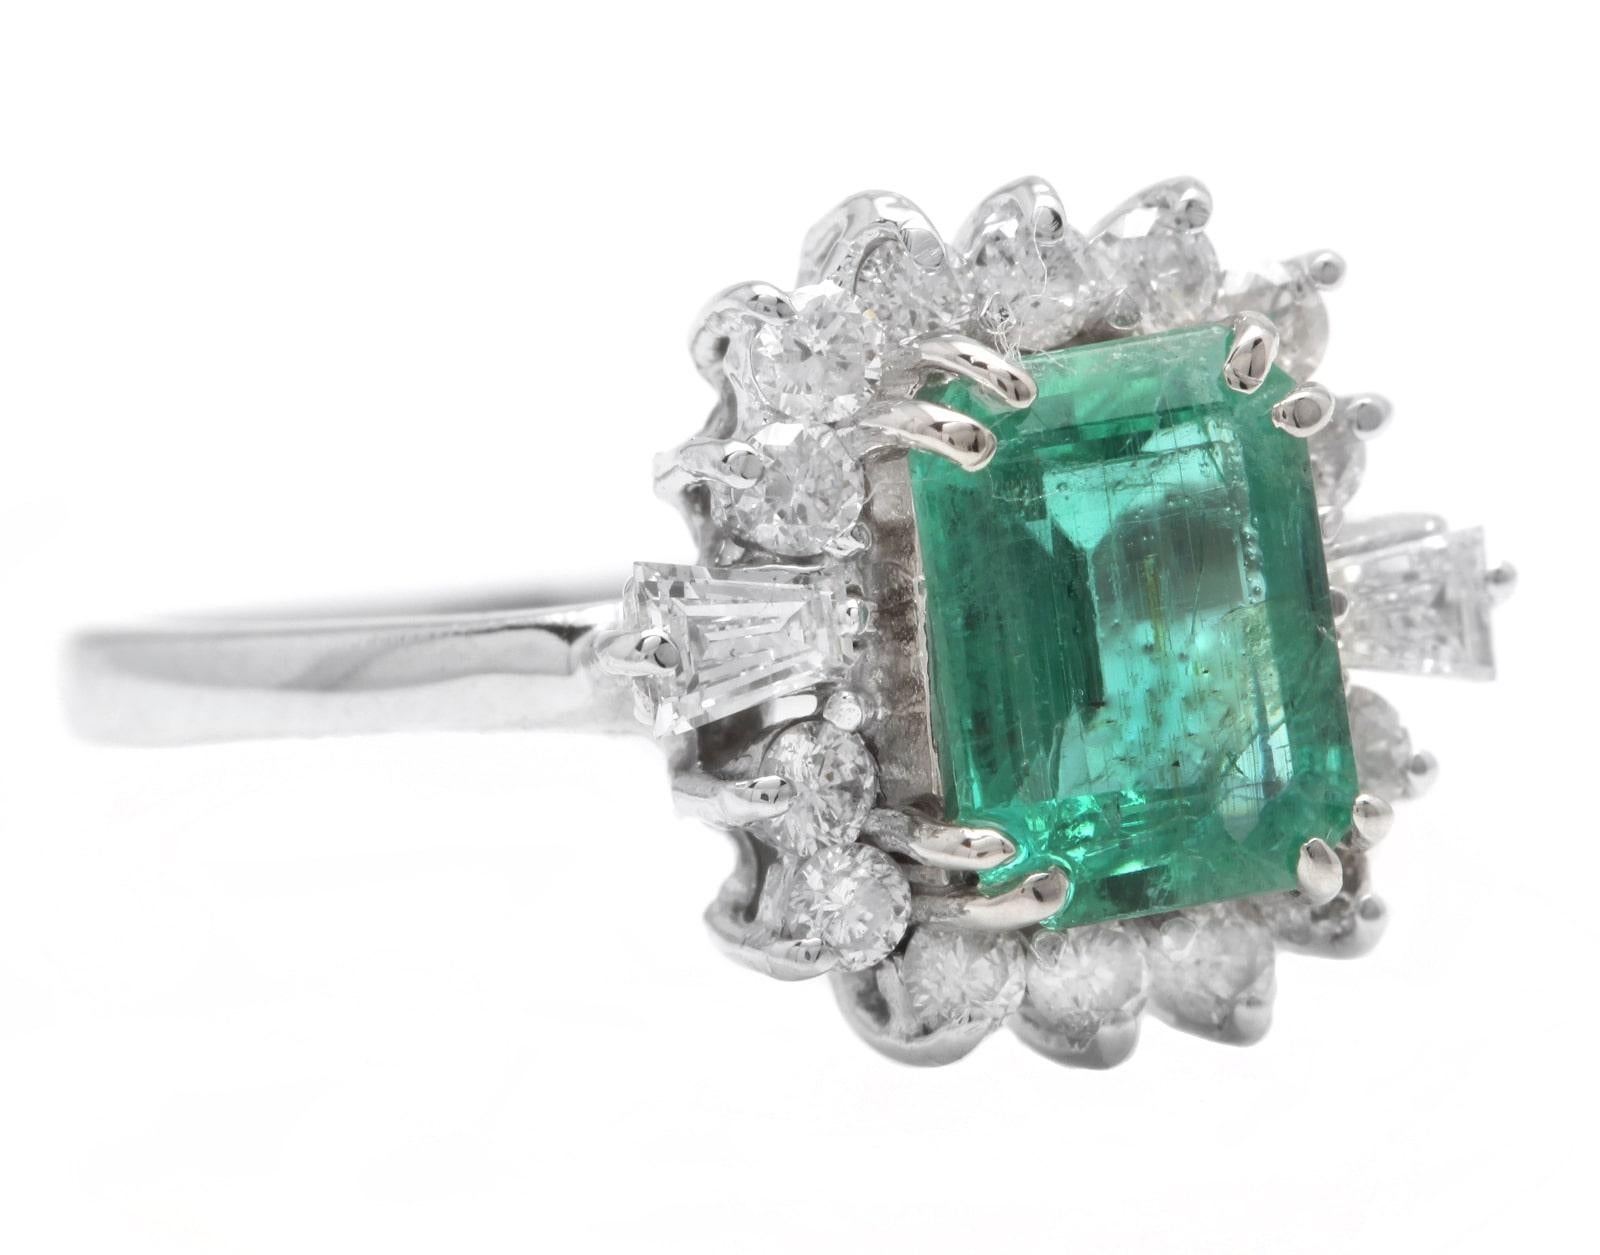 1.45 Carats Natural Emerald and Diamond 14K Solid White Gold Ring

Suggested Replacement Value: $2,500.00

Total Natural Green Emerald Weight is: Approx. 1.00 Carats 

Emerald Measures: Approx. 7.50 x 5.50mm

Natural Round & Baguette Diamonds